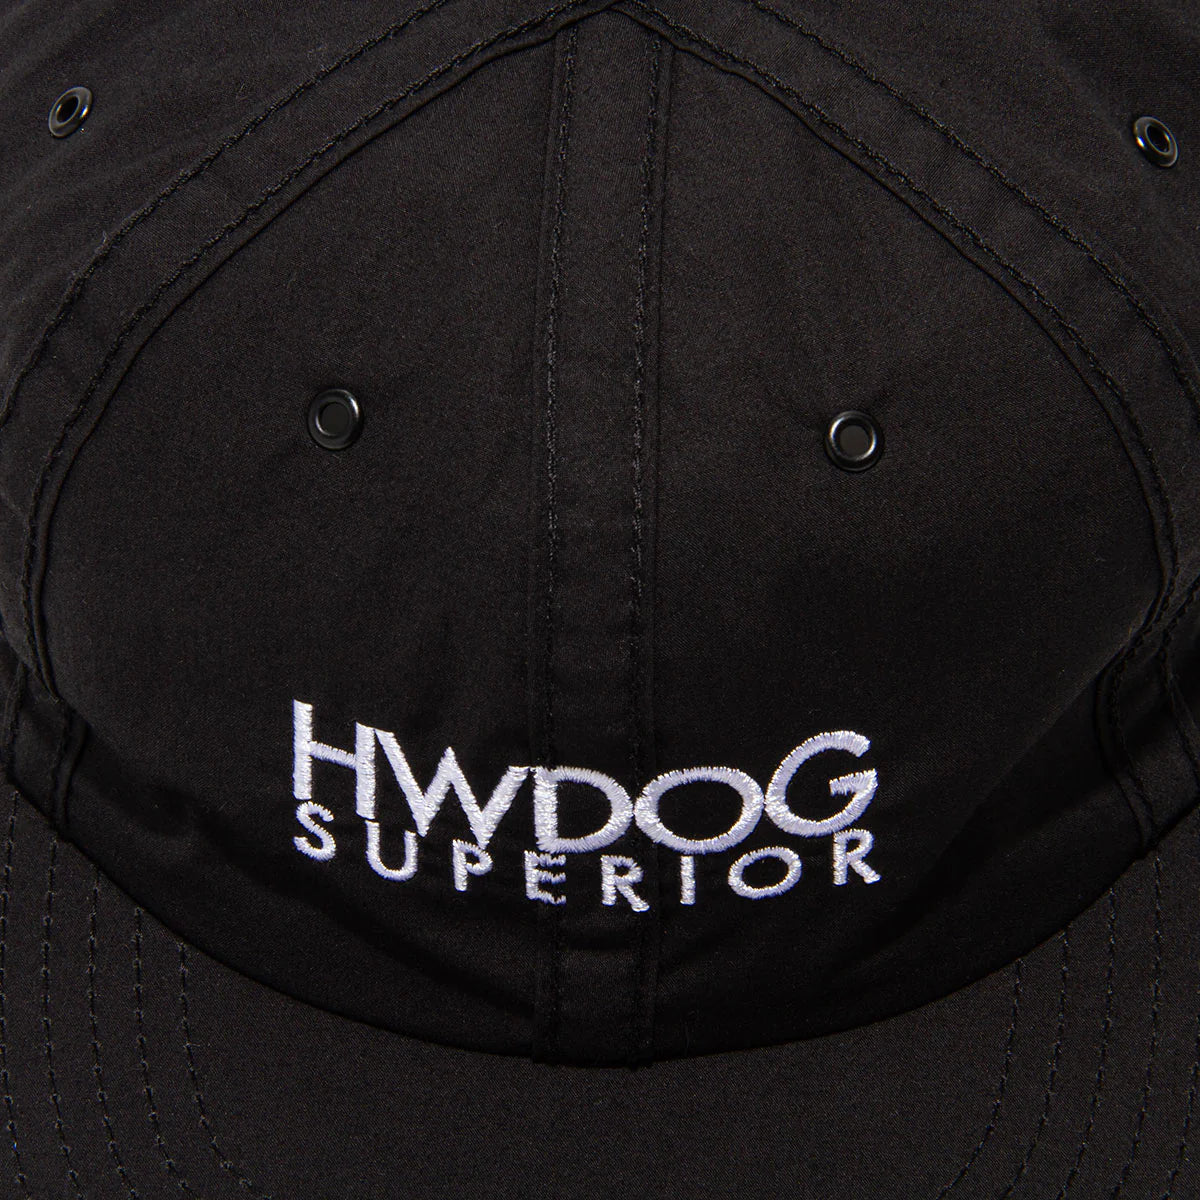 The H.W. Dog & Co - INSIDE OUT CAP - Black